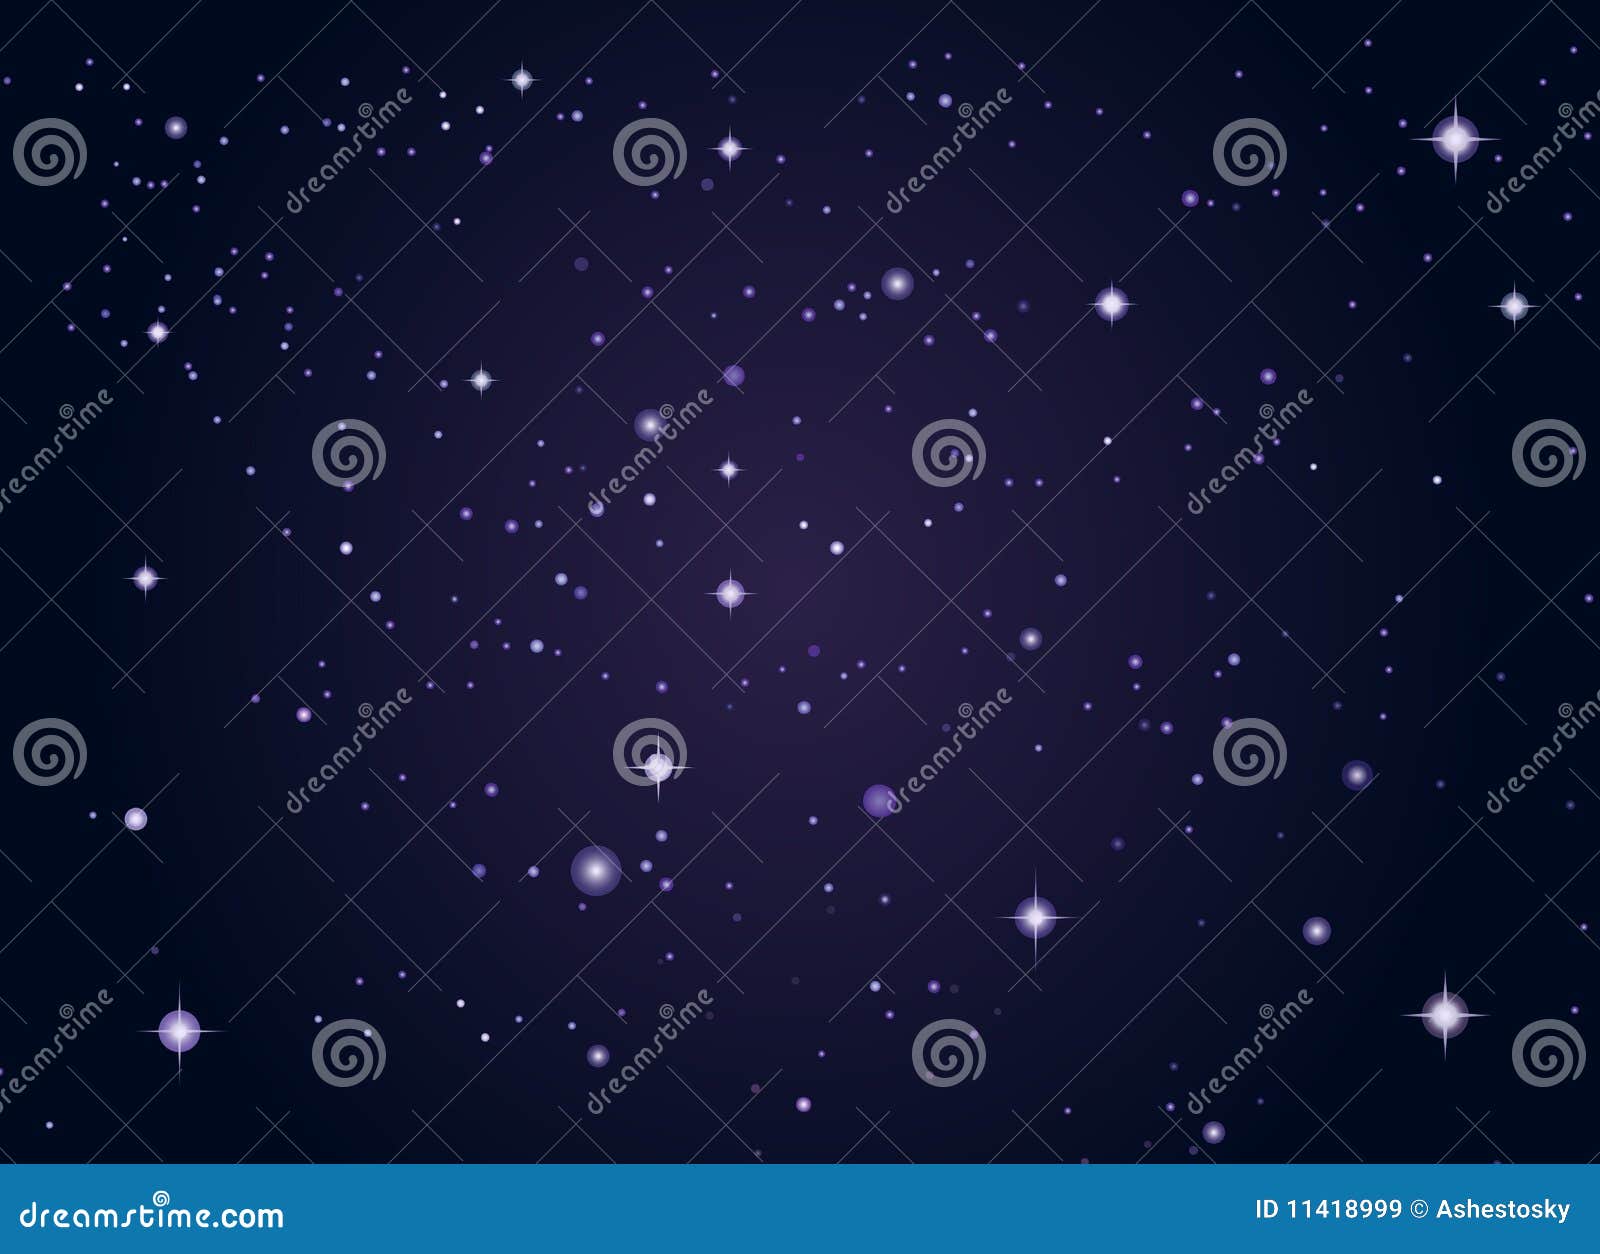 outer space stars background